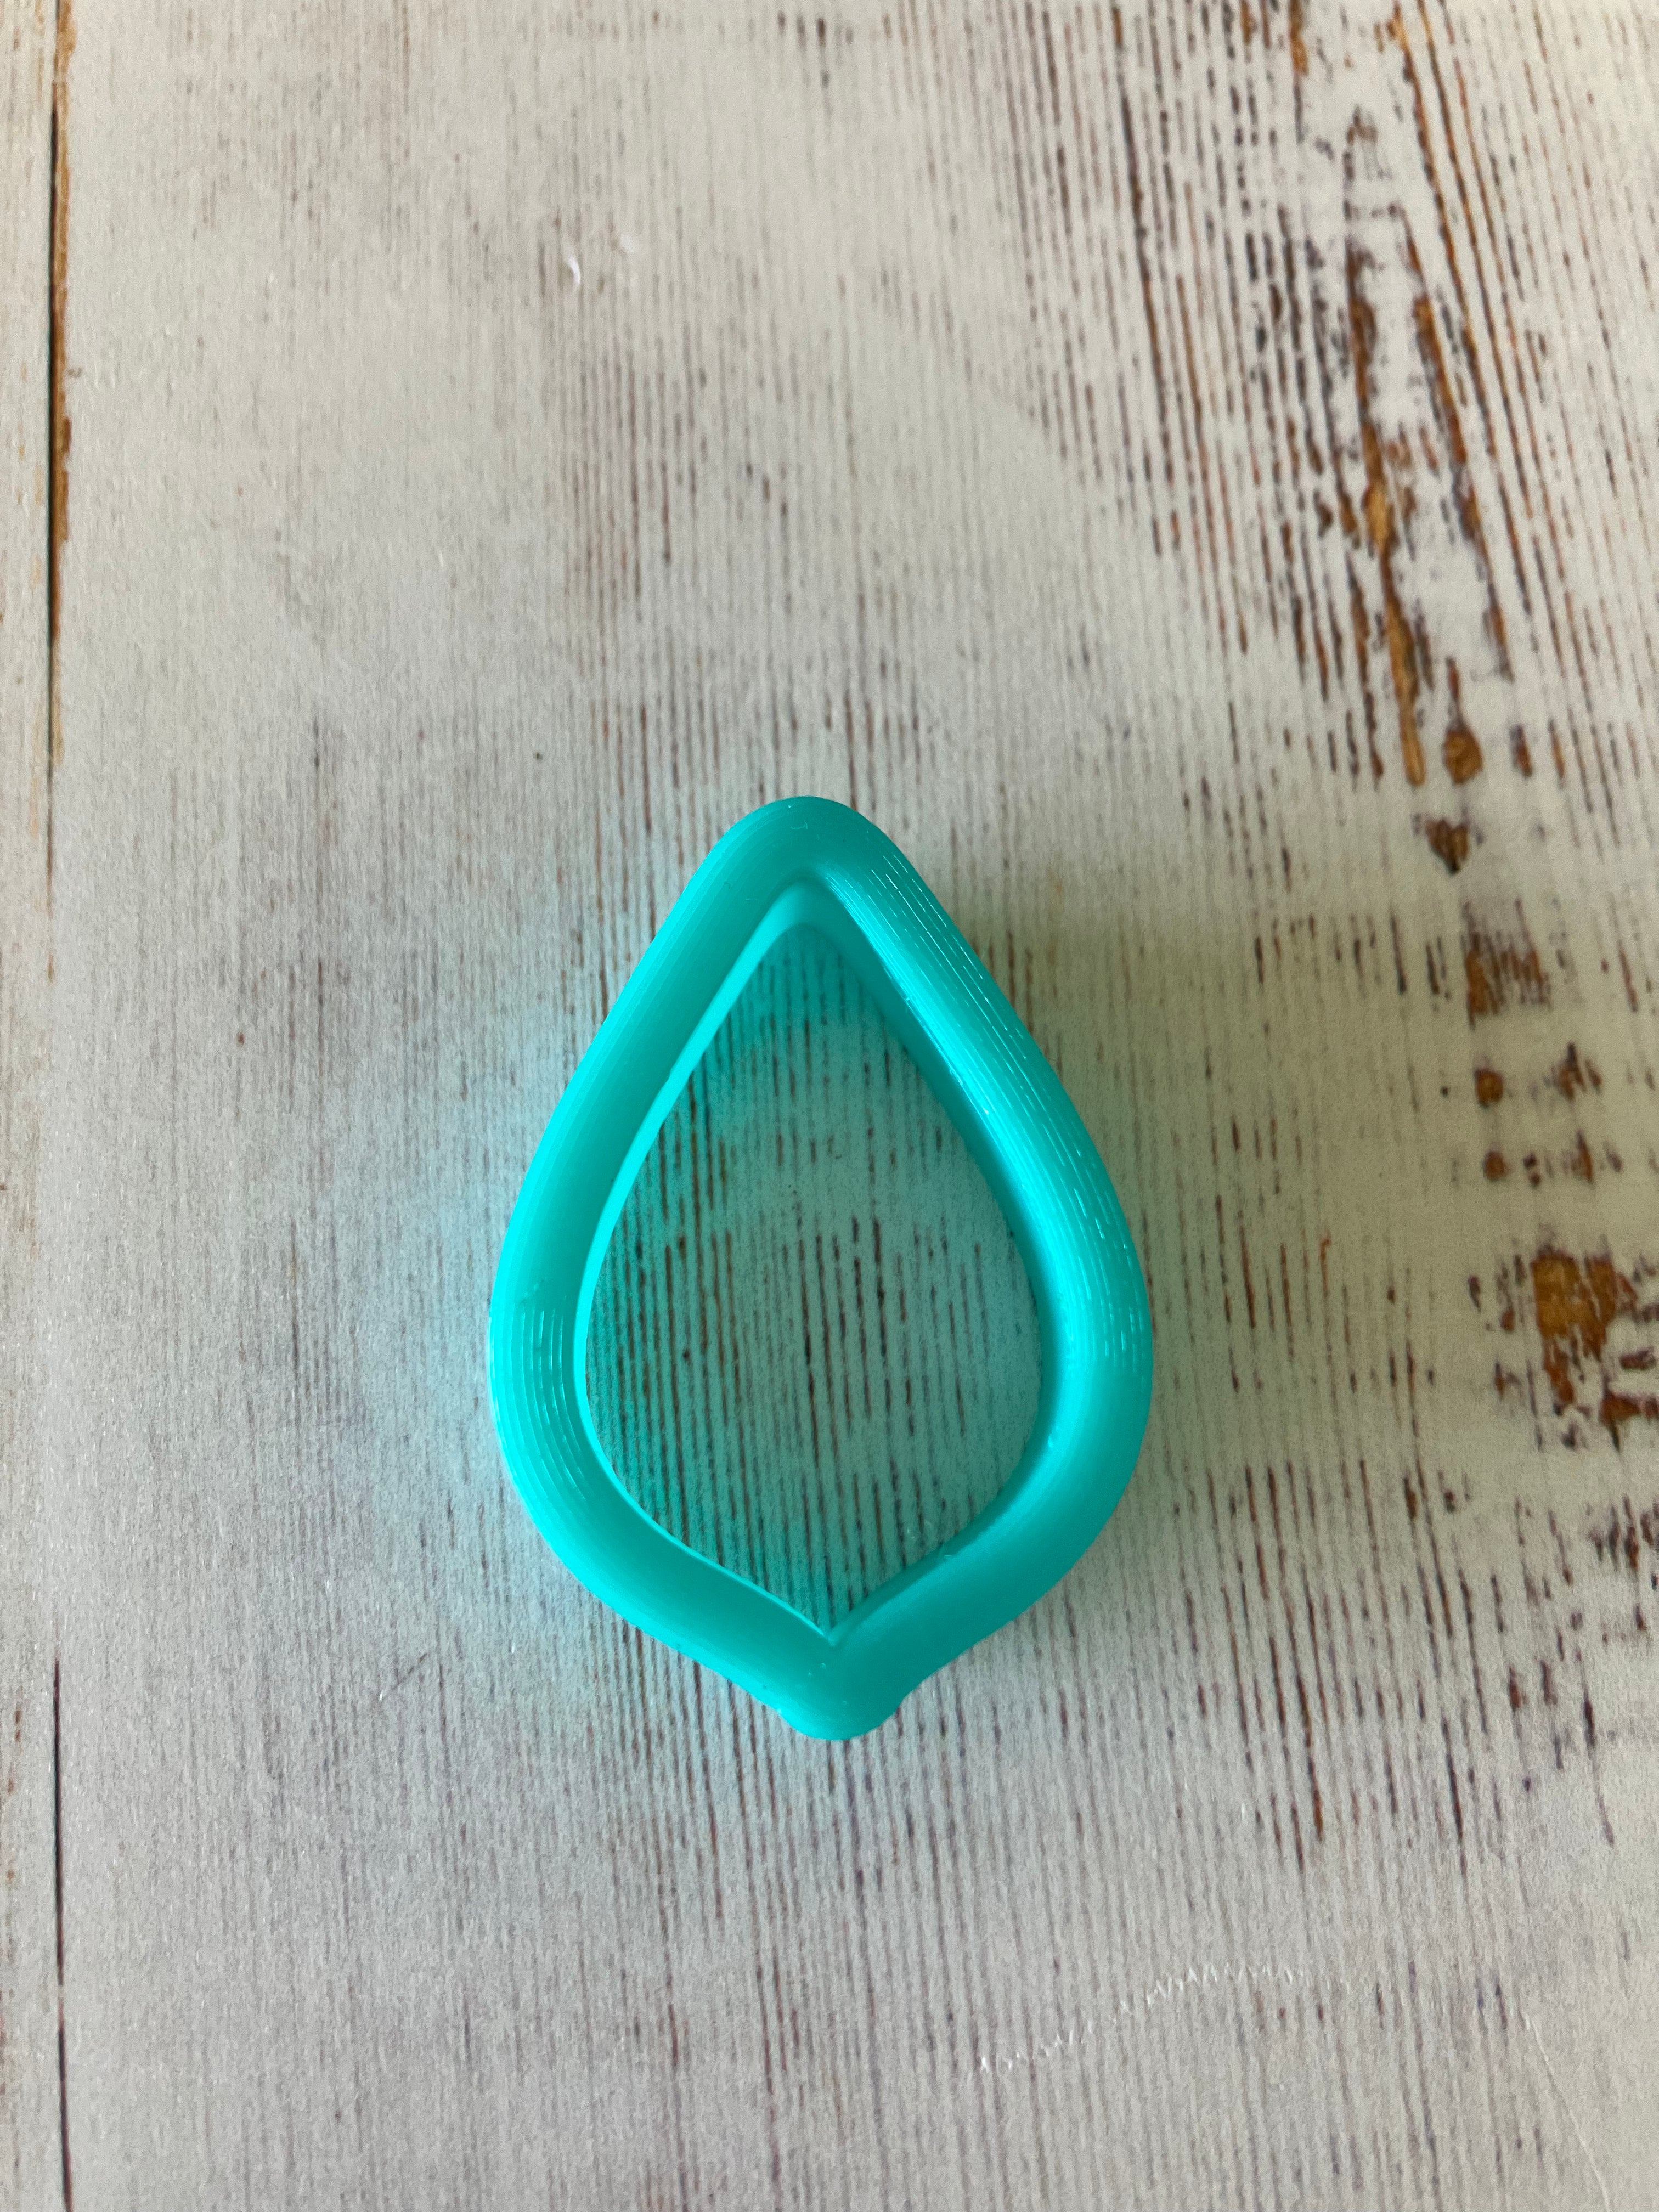 3D Gizmo's -  Pointed Teardrop